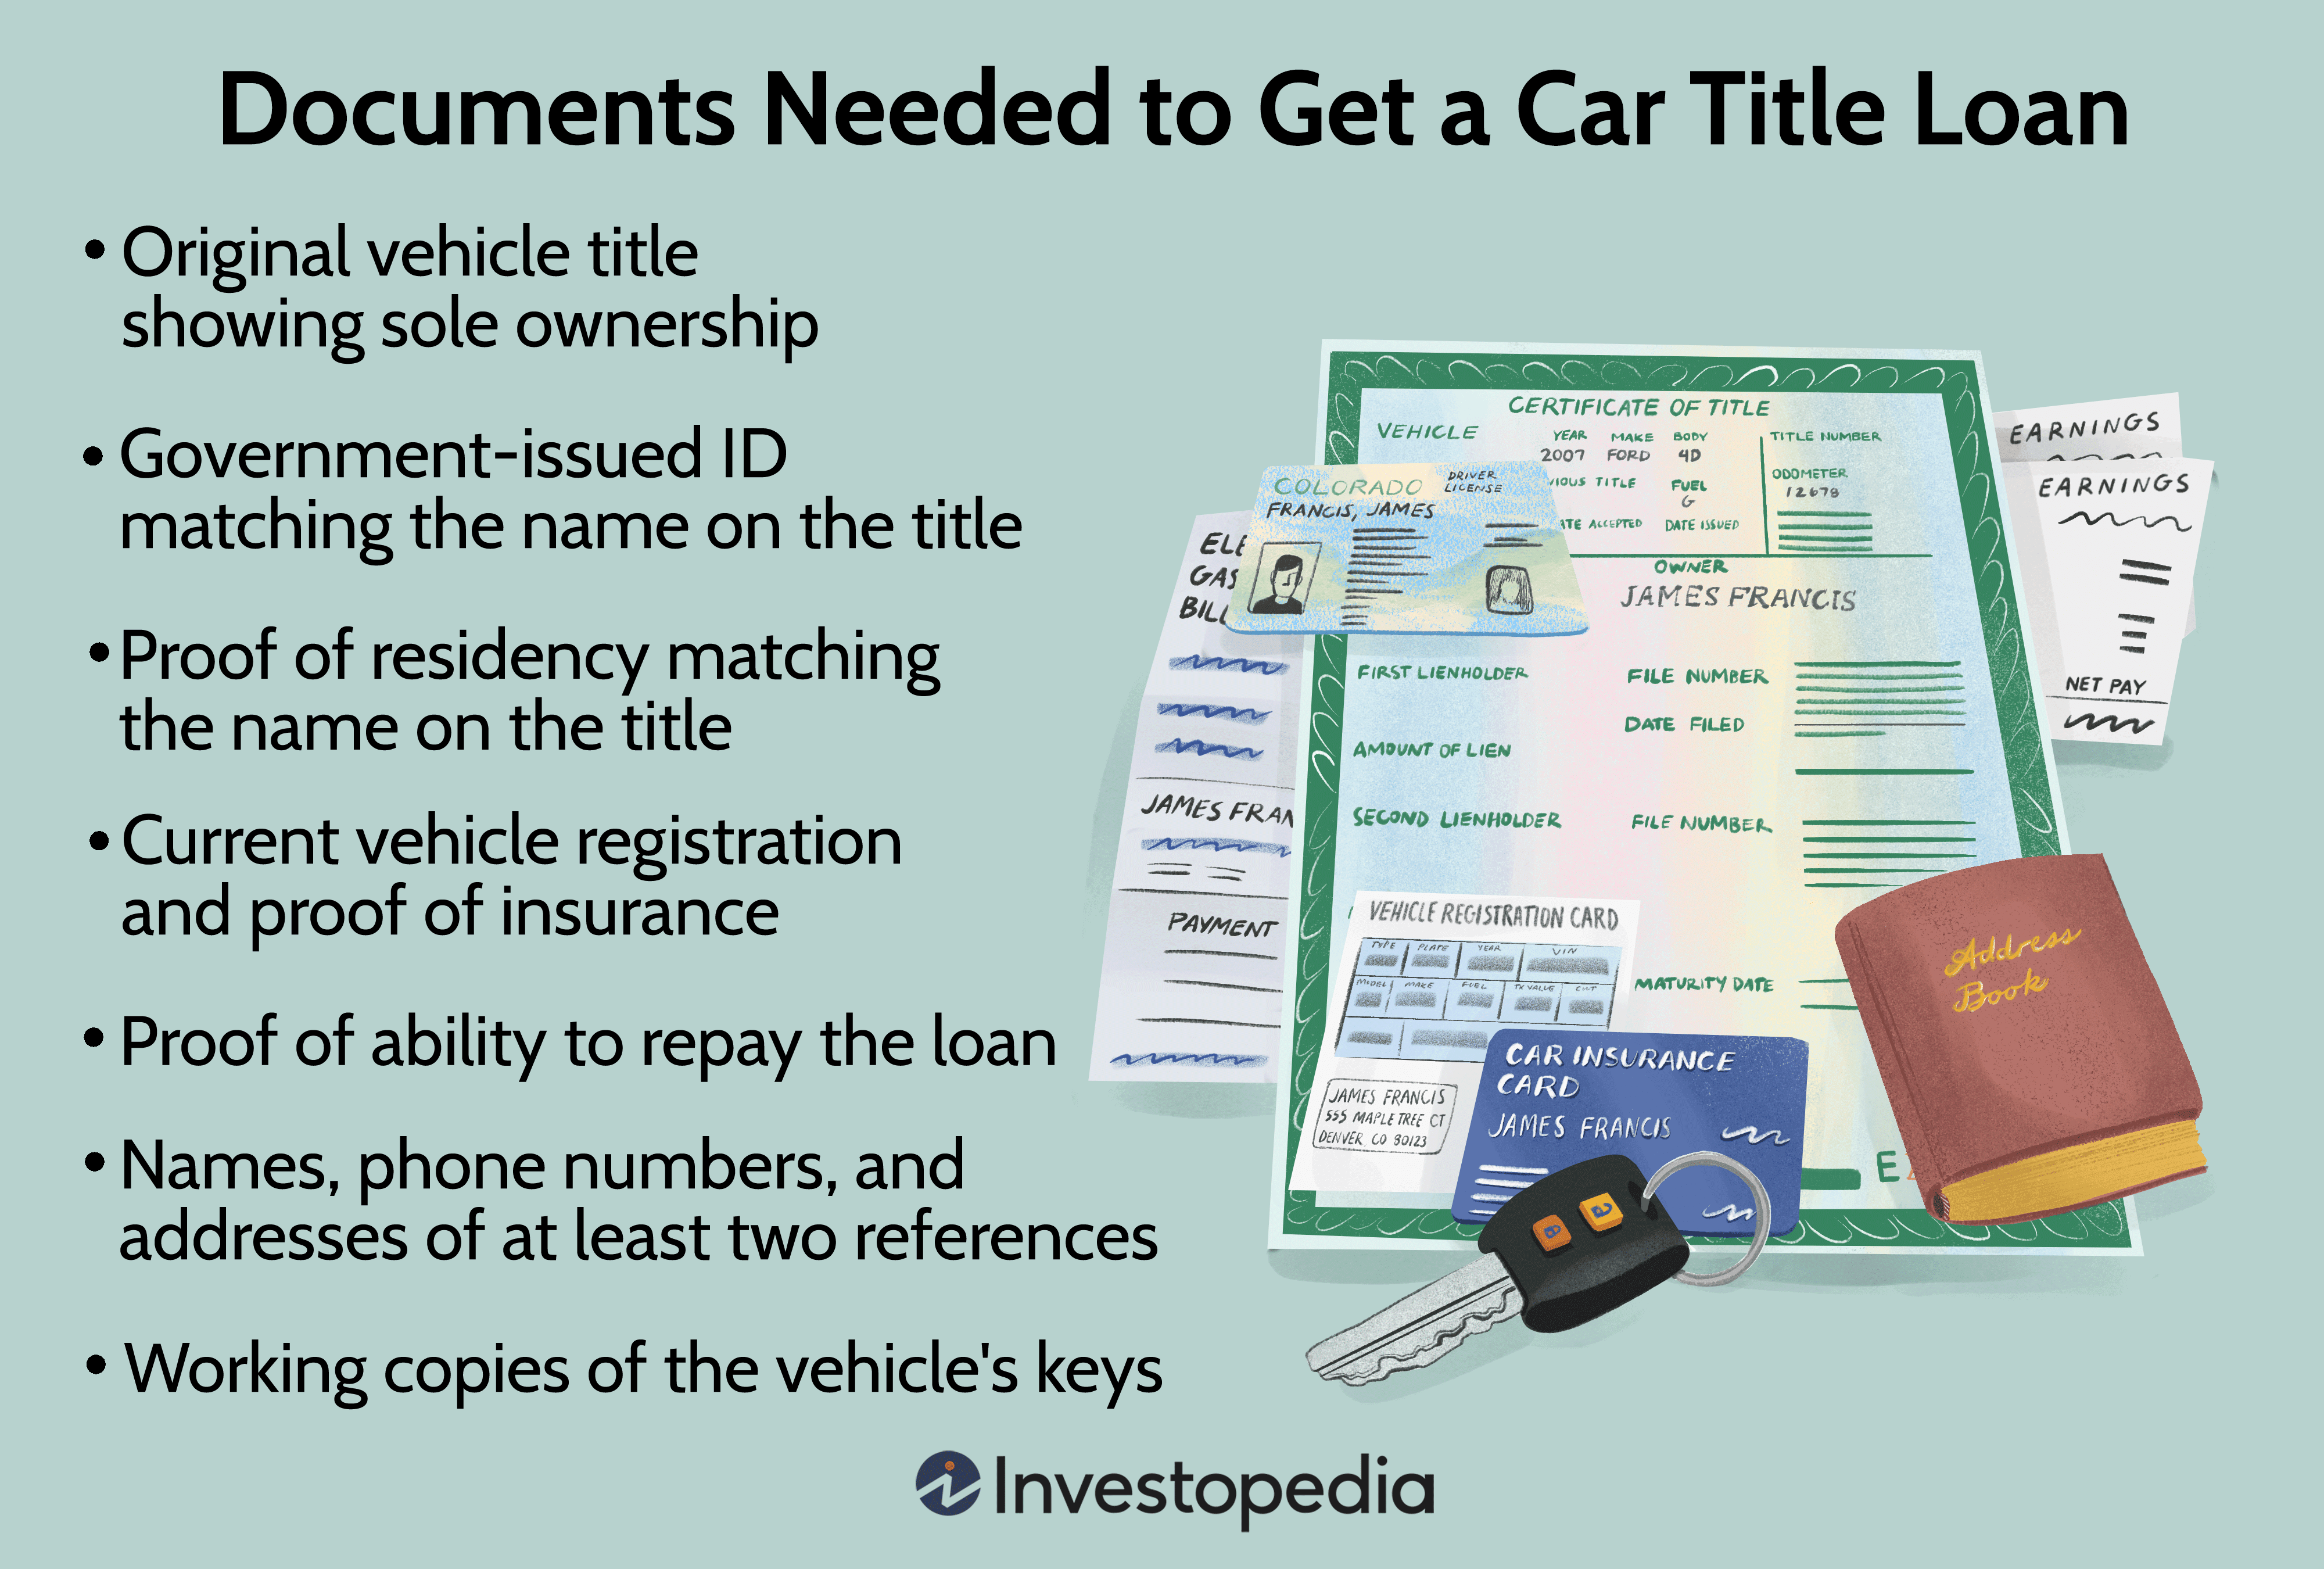 Documents Needed to Get a Car Title Loan